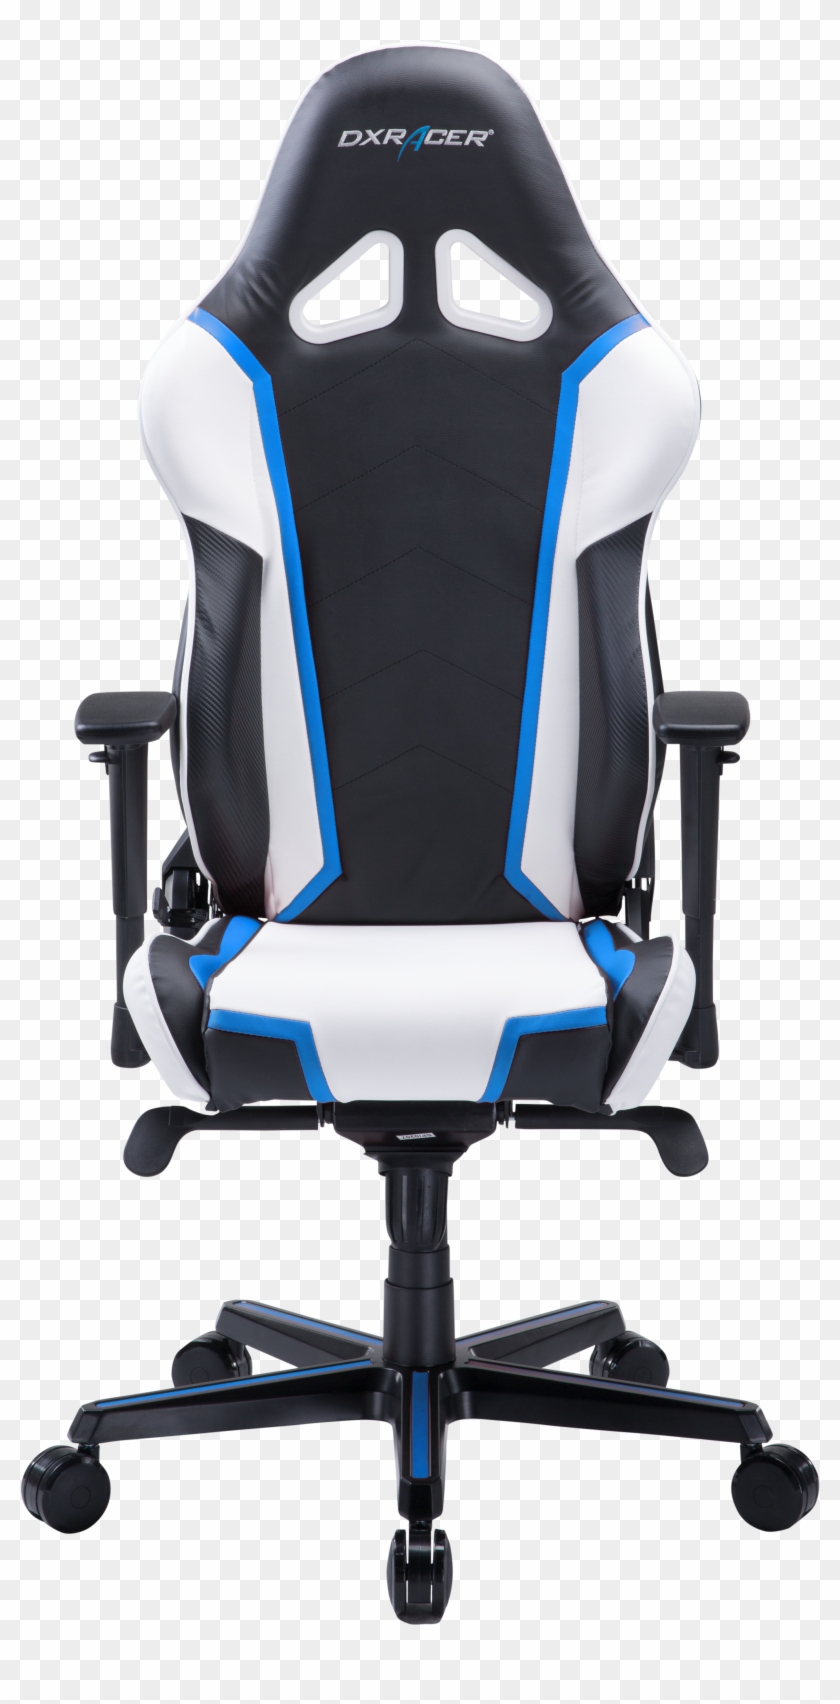 Details About Dxracer Gaming Chair Office Racing Series - Dxracer Oh Rh110 Nwr Clipart #4802905